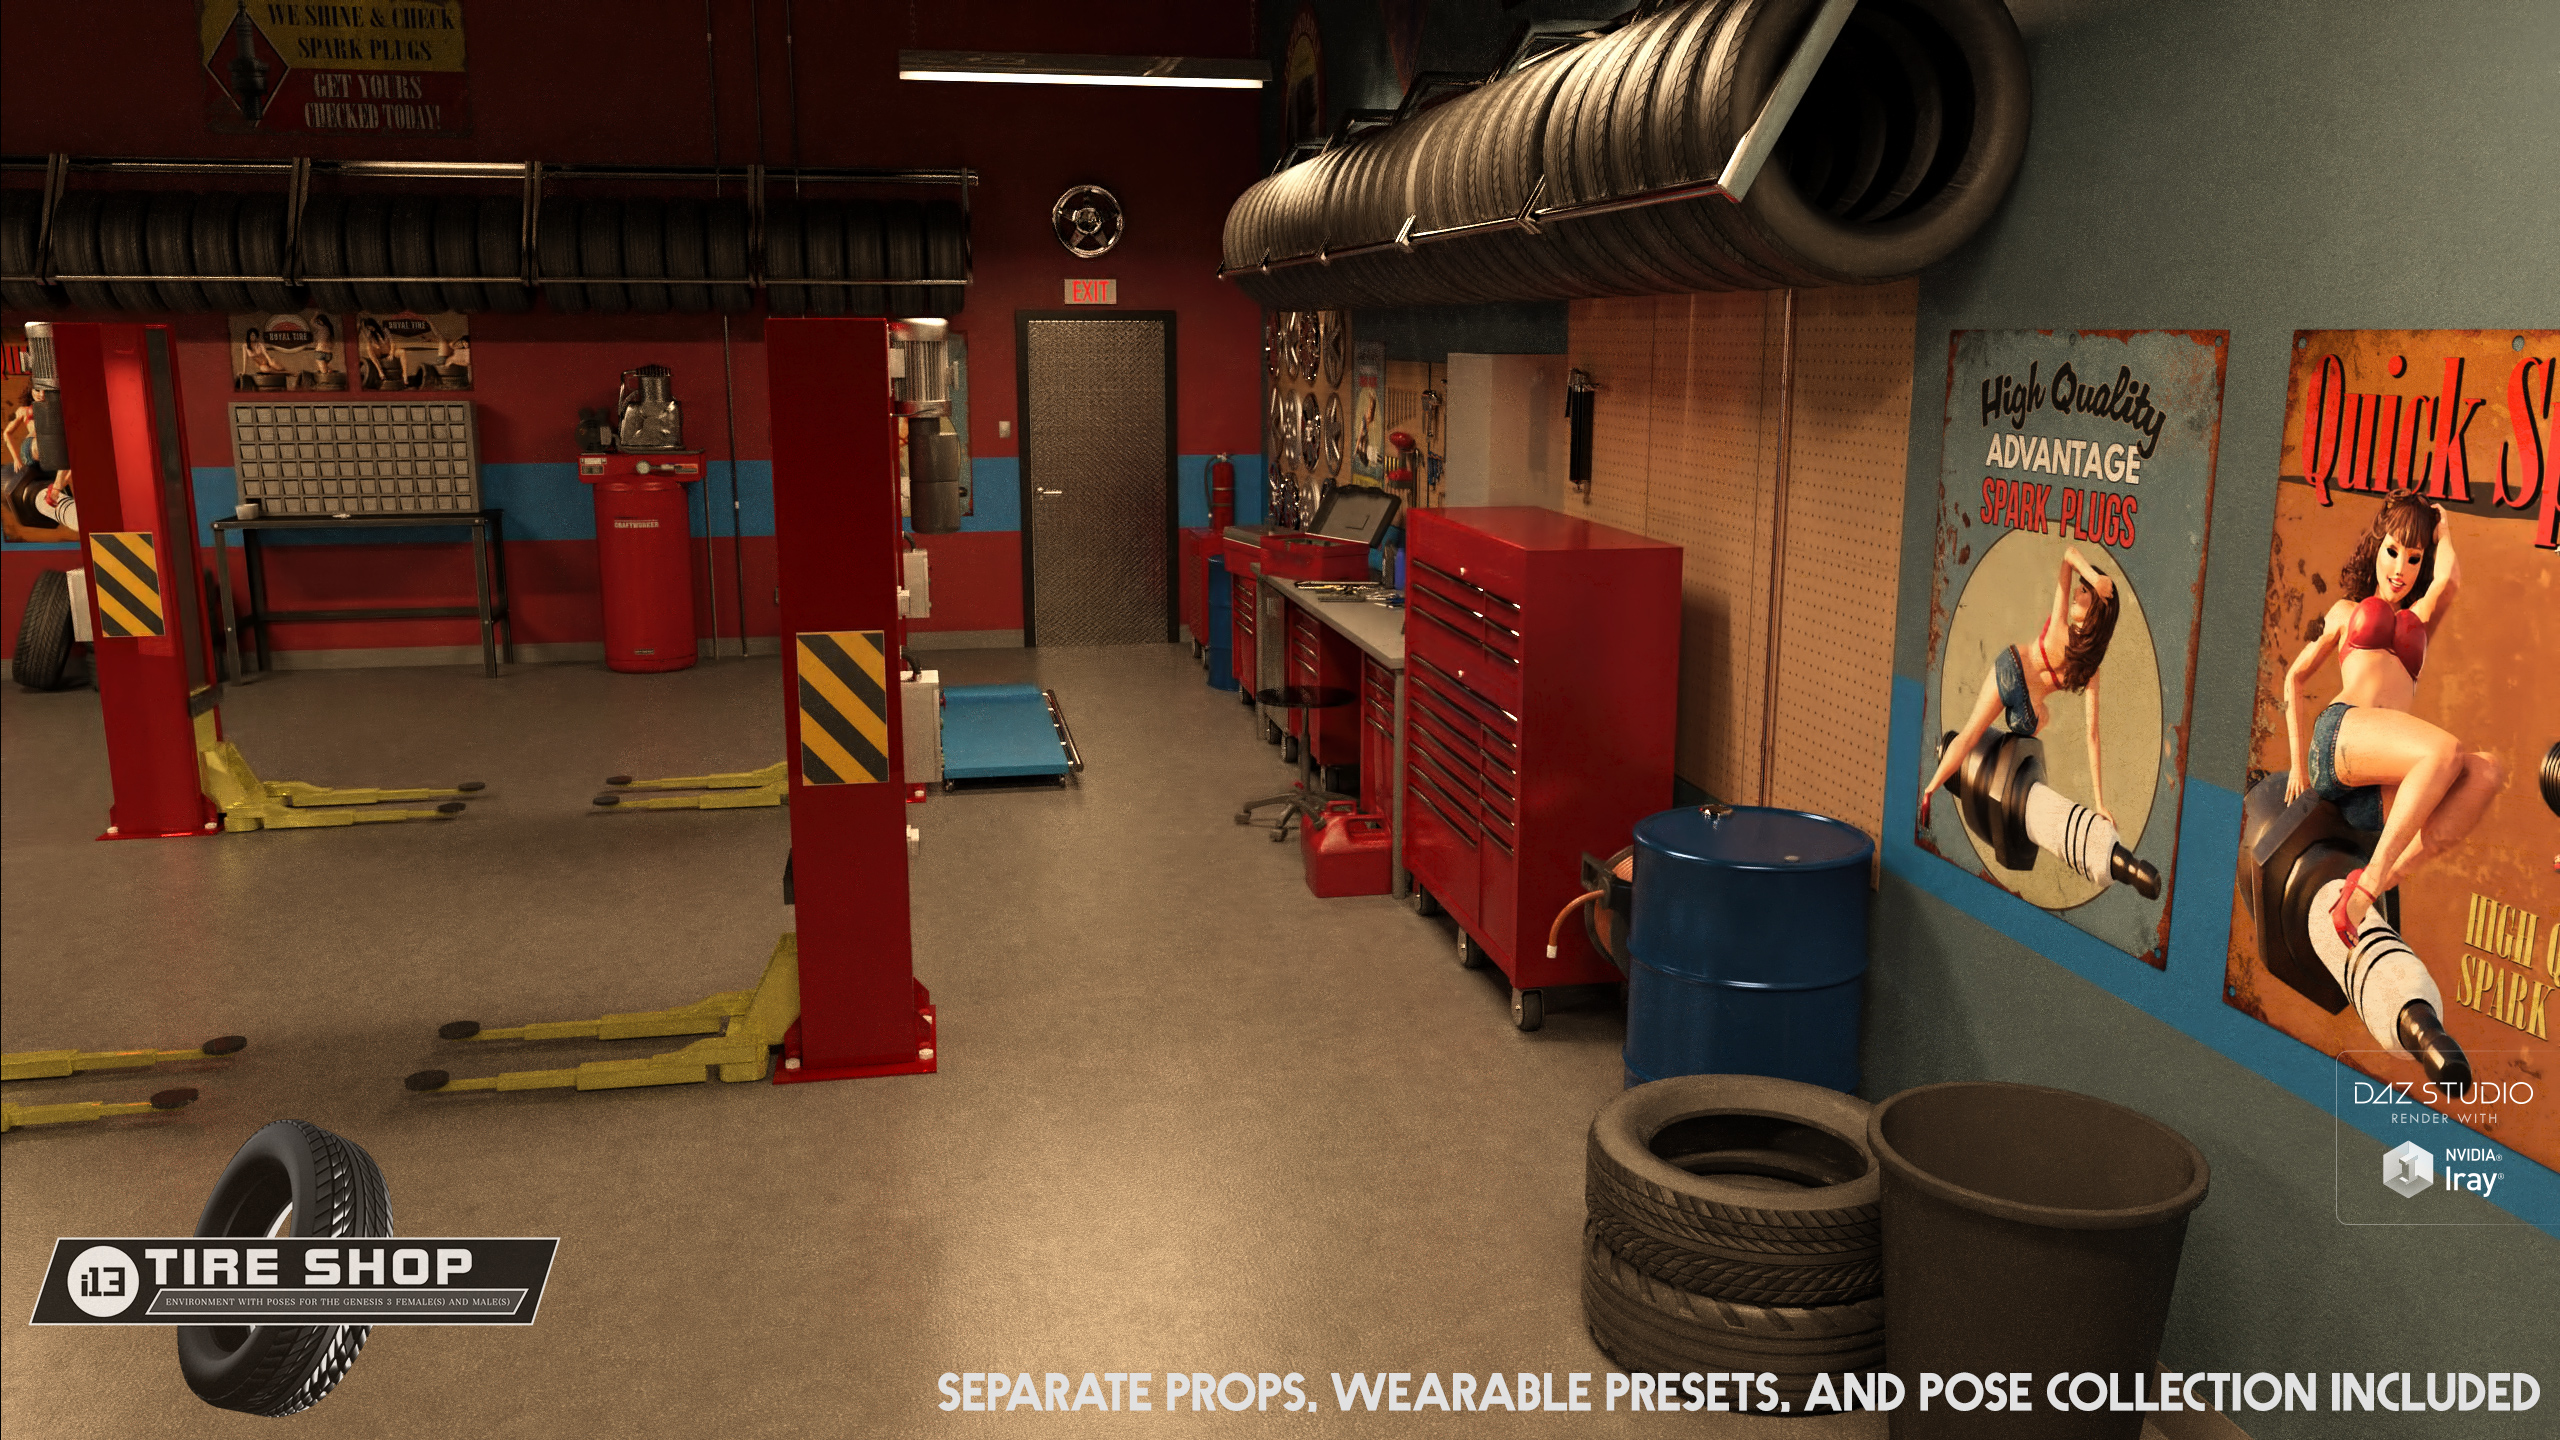 i13 Tire Shop Environment with Poses by: ironman13, 3D Models by Daz 3D